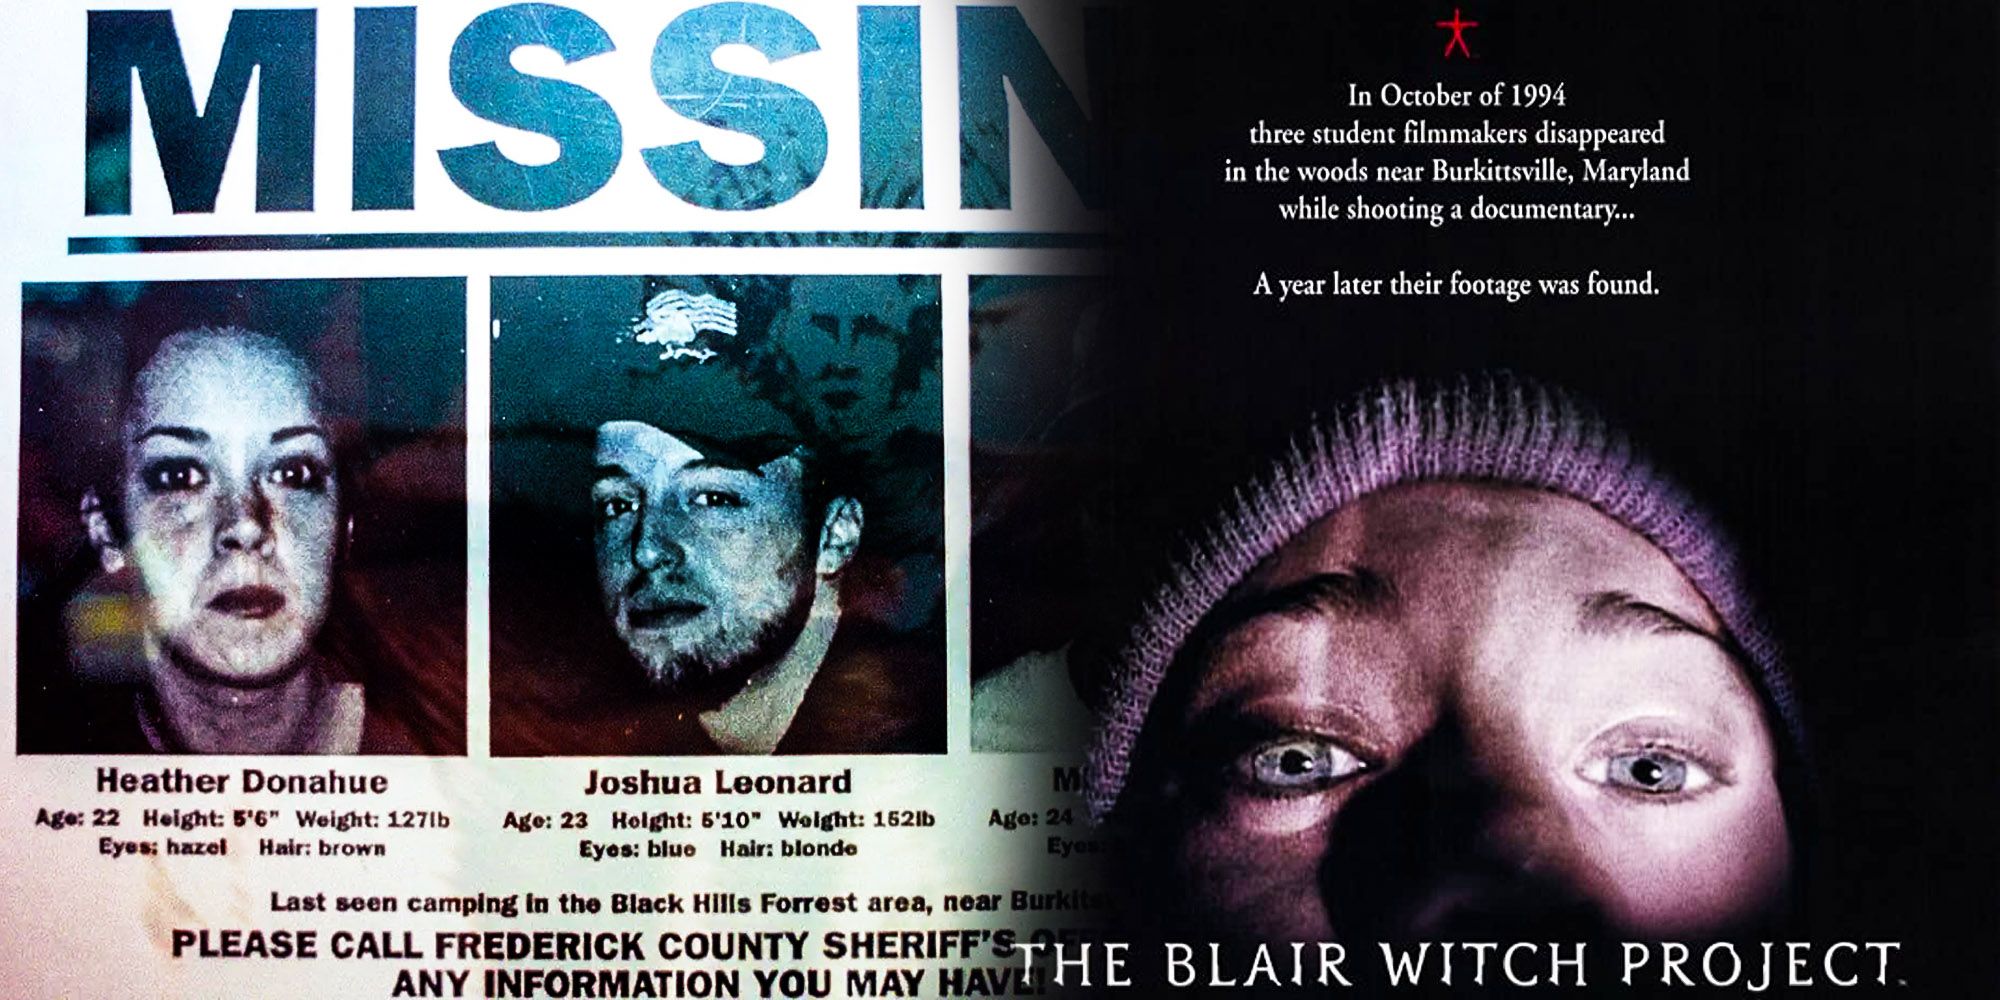 The Blair Witch Project missing poster and screen grab